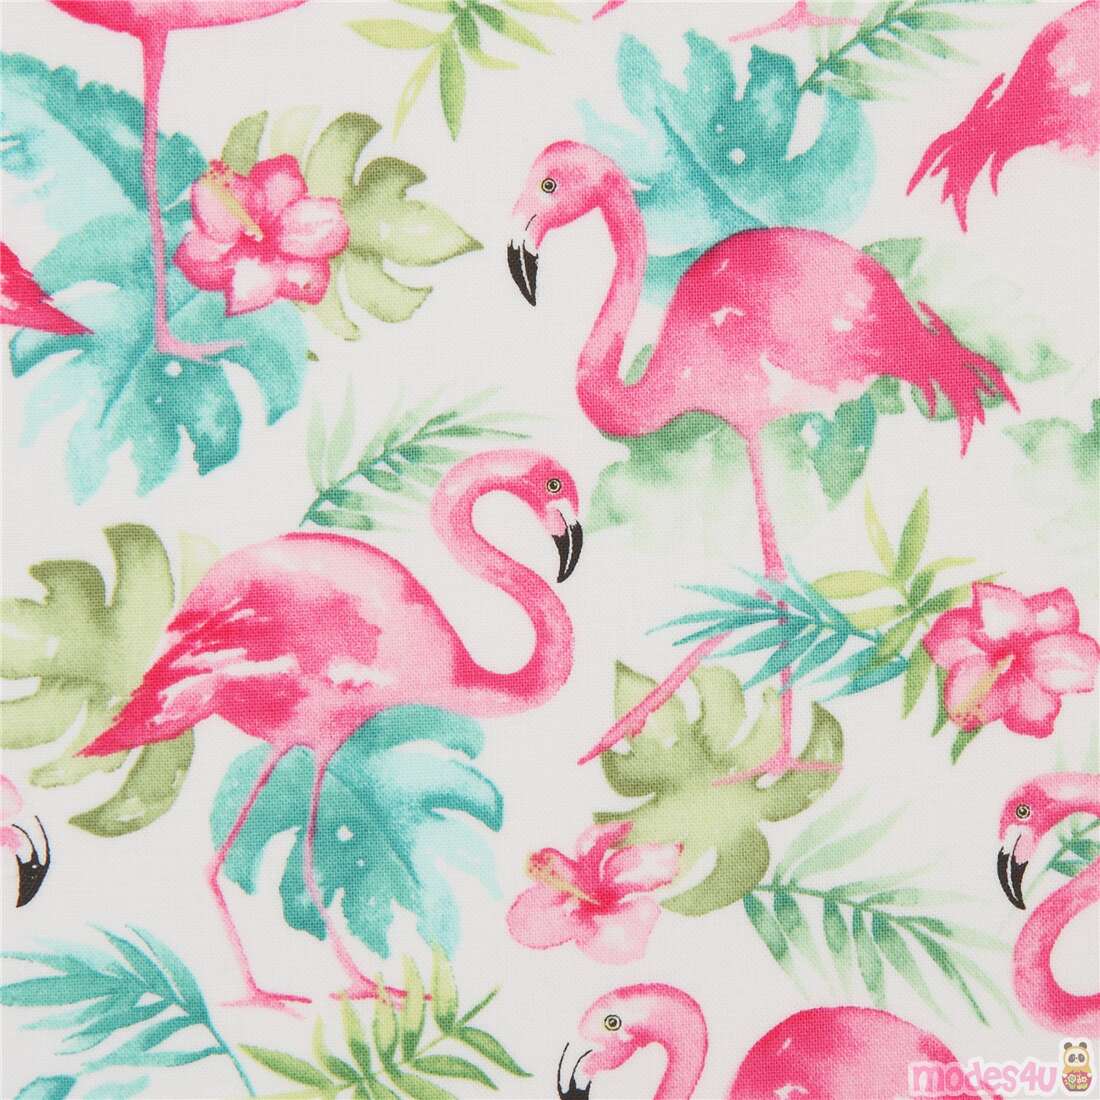 Re-Think Pink Flamingos & Tropical Foliage Nesting Bamboo Fiber Food S –  Aura In Pink Inc.